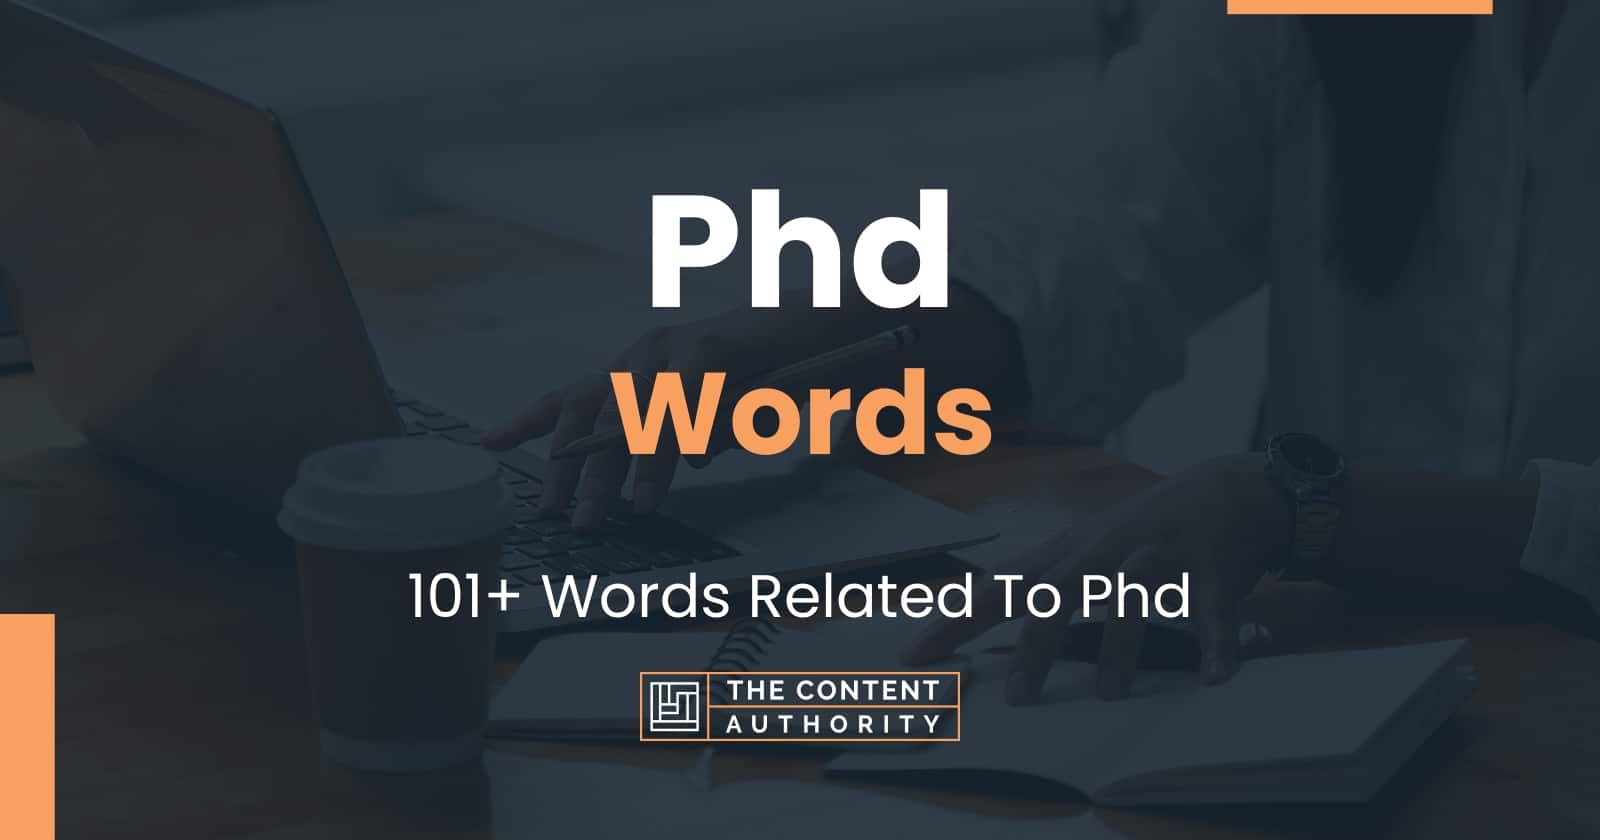 what is another word for phd